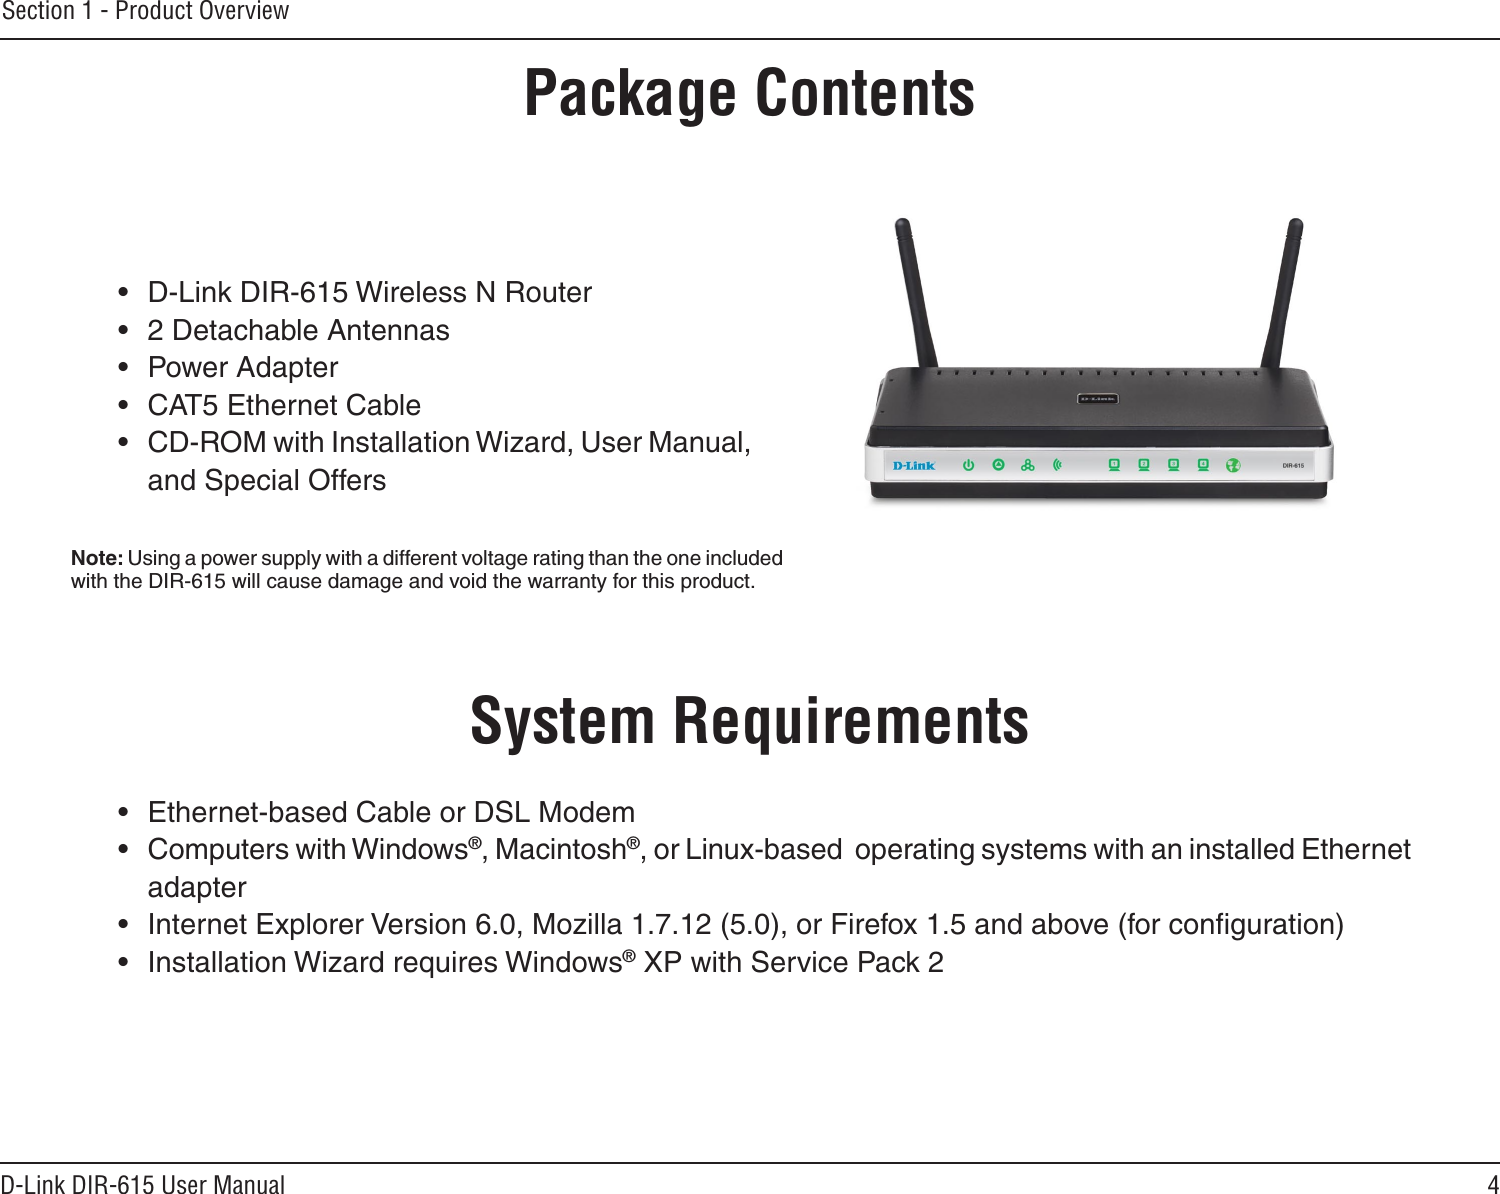 4D-Link DIR-615 User ManualSection 1 - Product Overview•  D-Link DIR-615 Wireless N Router•  2 Detachable Antennas•  Power Adapter•  CAT5 Ethernet Cable•  CD-ROM with Installation Wizard, User Manual, and Special OffersSystem Requirements•  Ethernet-based Cable or DSL Modem•  Computers with Windows®, Macintosh®, or Linux-based  operating systems with an installed Ethernet adapter•  Internet Explorer Version 6.0, Mozilla 1.7.12 (5.0), or Firefox 1.5 and above (for conﬁguration)•  Installation Wizard requires Windows® XP with Service Pack 2Product OverviewPackage ContentsNote: Using a power supply with a different voltage rating than the one included with the DIR-615 will cause damage and void the warranty for this product.